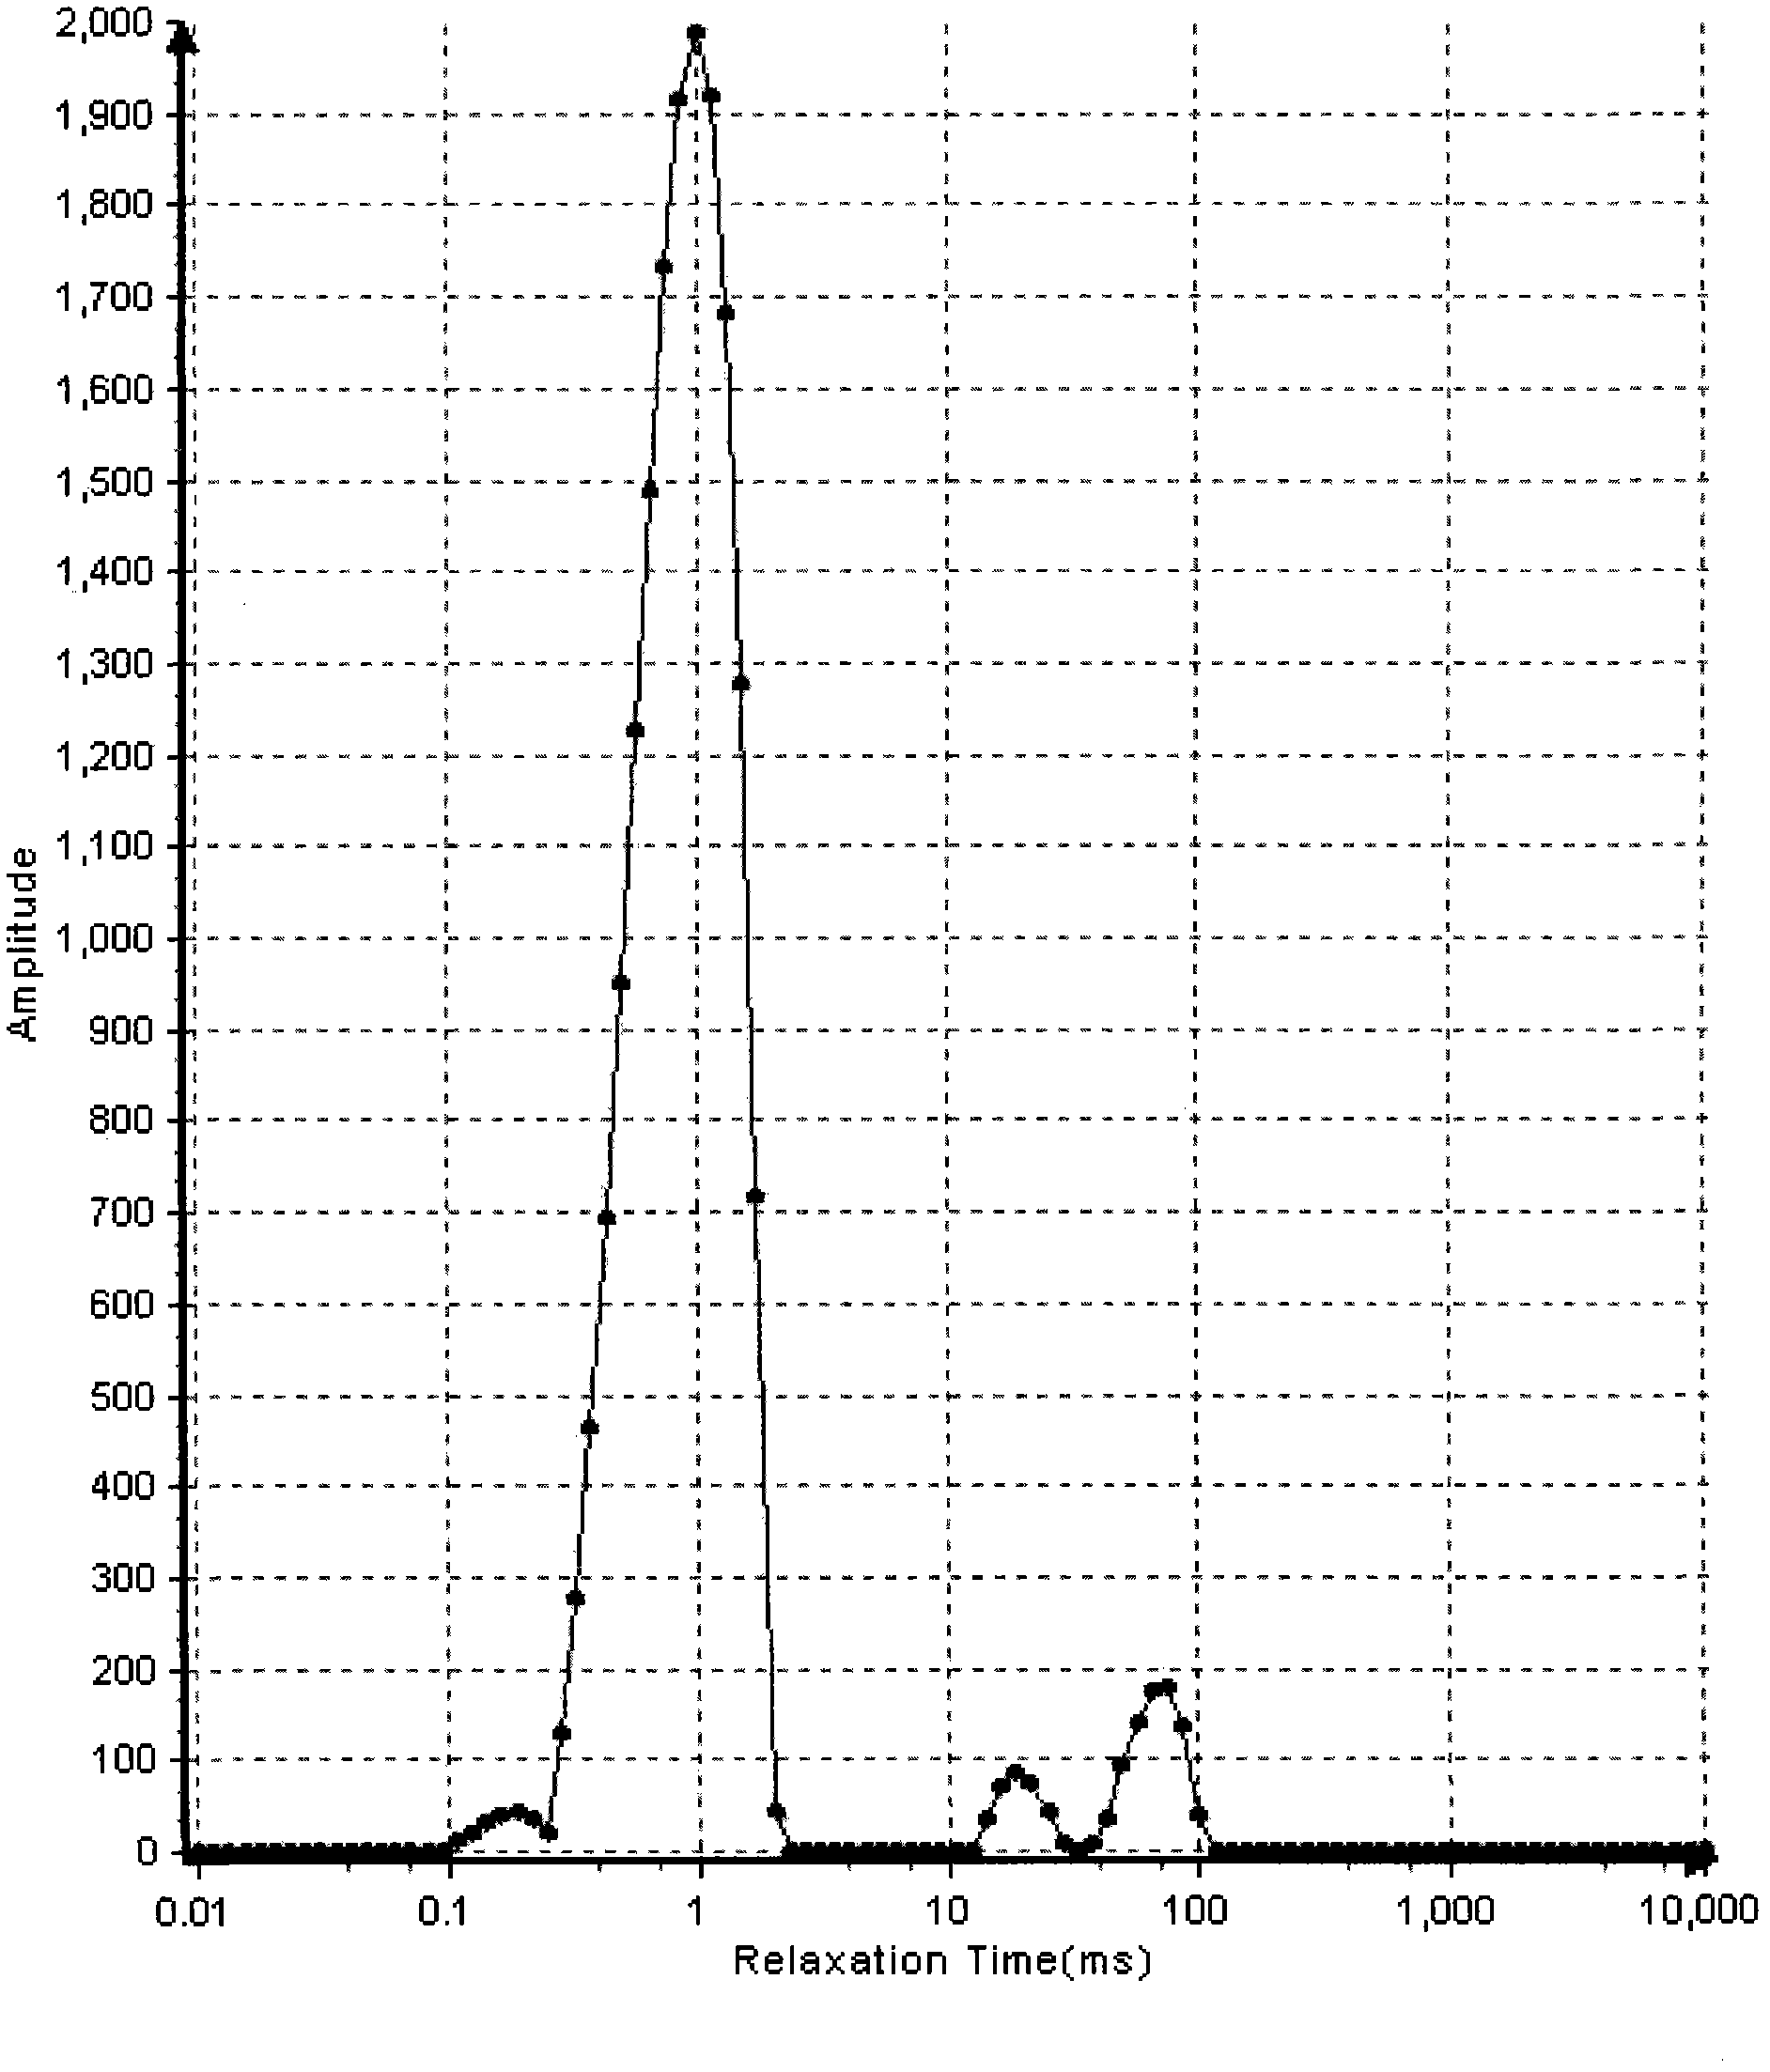 Method for measuring oil content of drilling fluid through low-field NMR (Nuclear Magnetic Resonance)